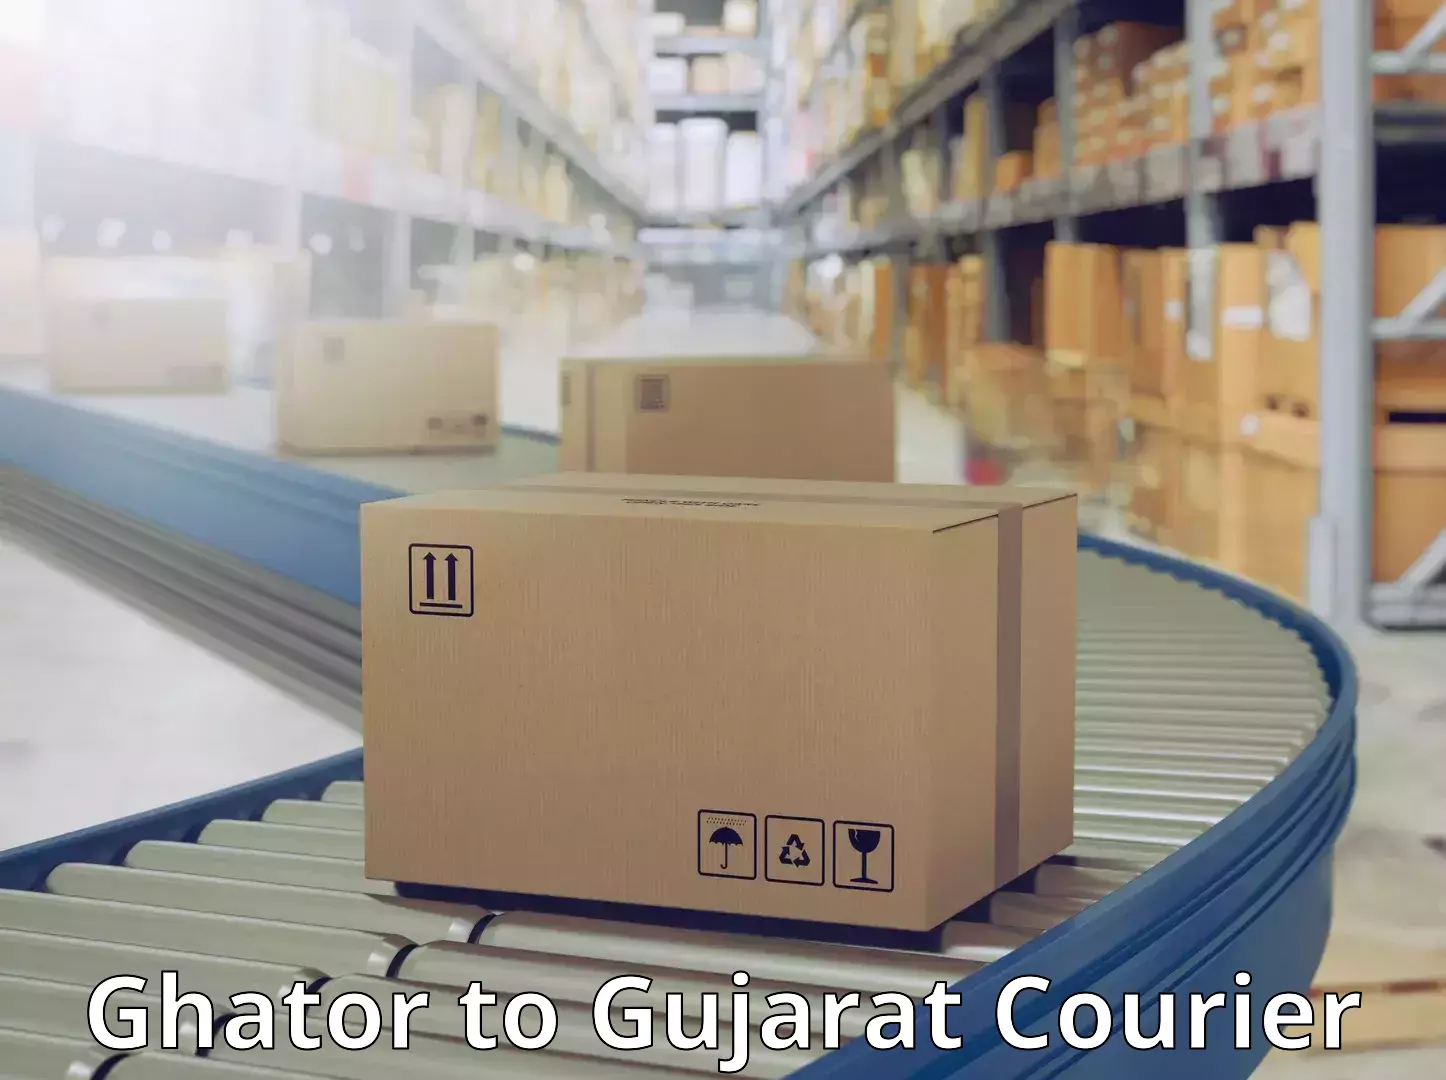 Courier app Ghator to Ahmedabad